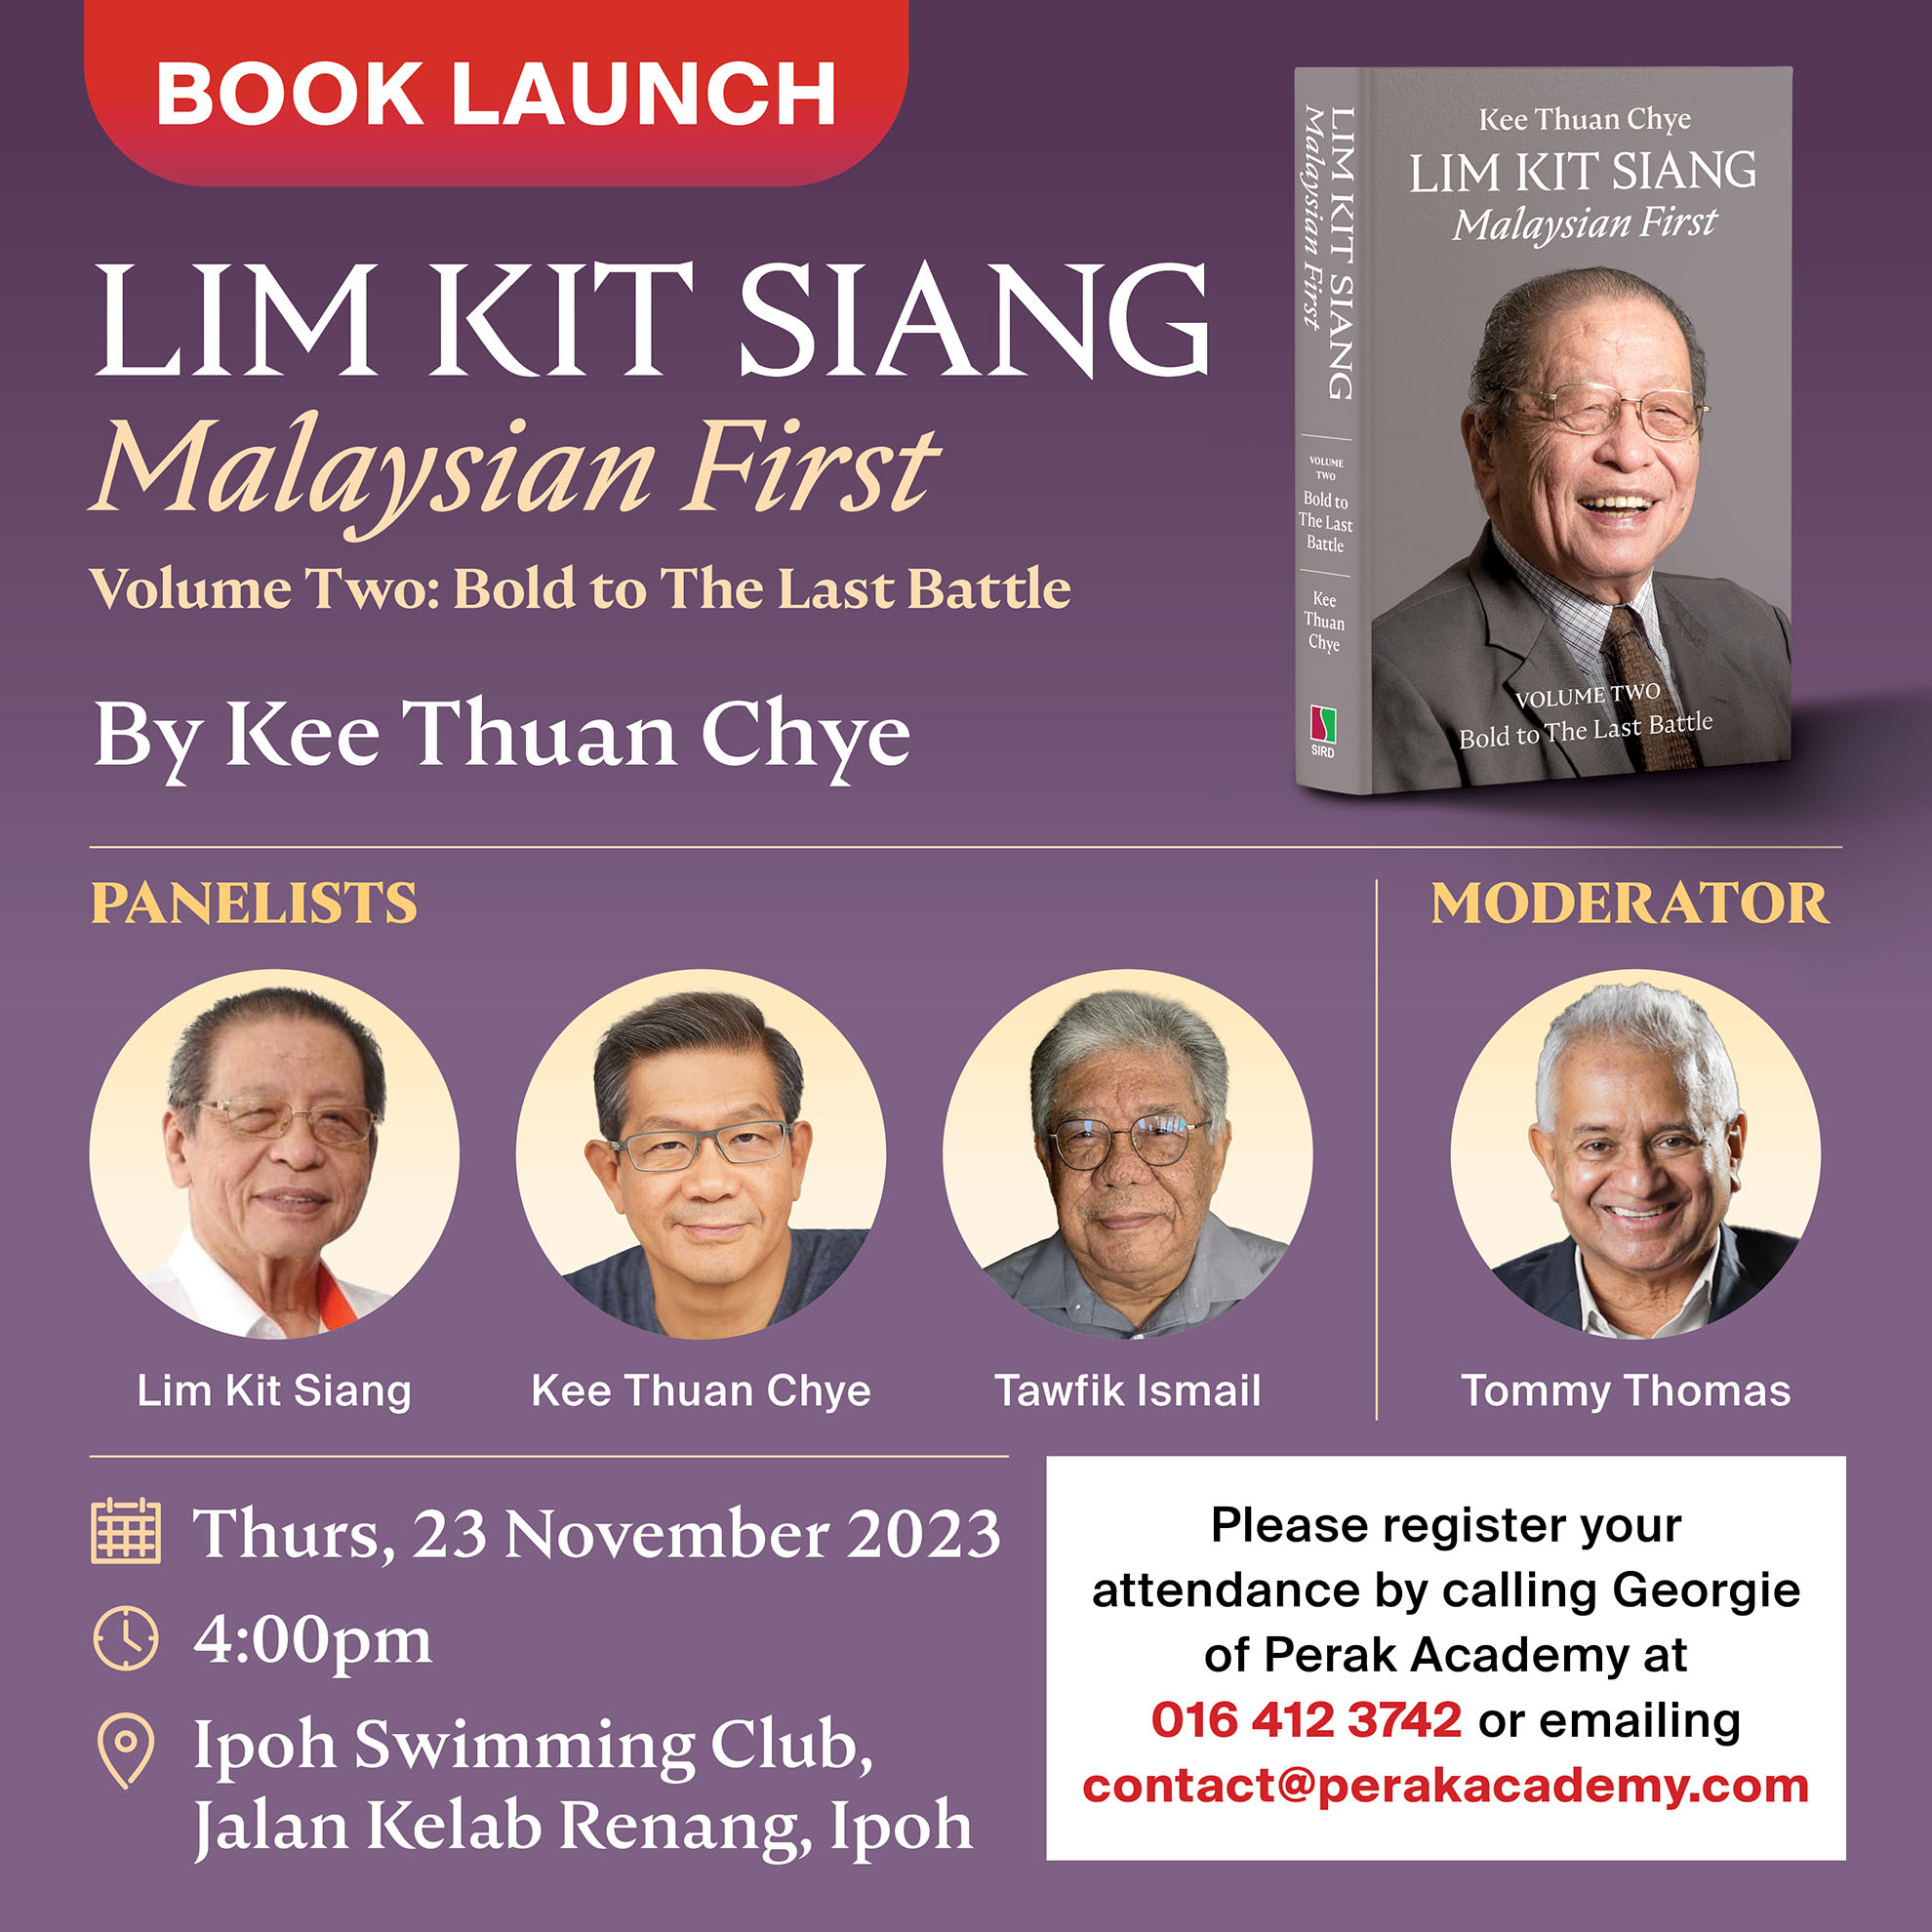 Book Launch: Lim Kit Siang Malaysian First Volume Two: Bold to the last battle. By Kee Thuan Chye